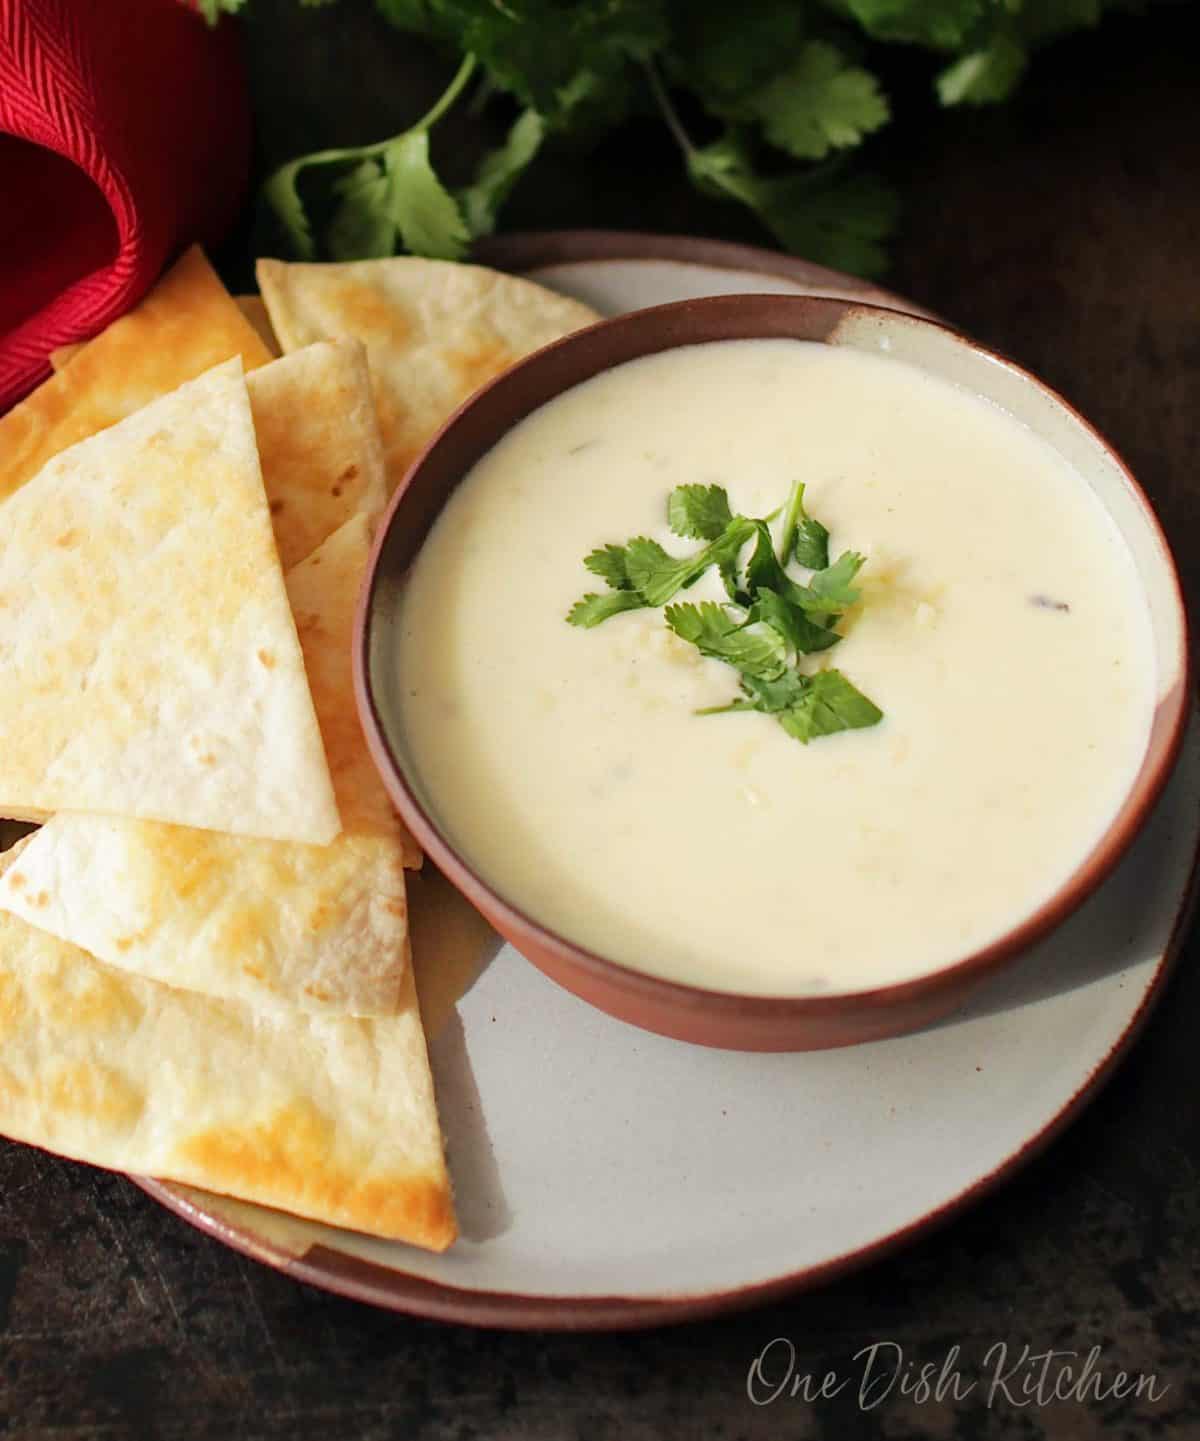 An overhead view of a small bowl of white queso on a plate with homemade tortilla chips.